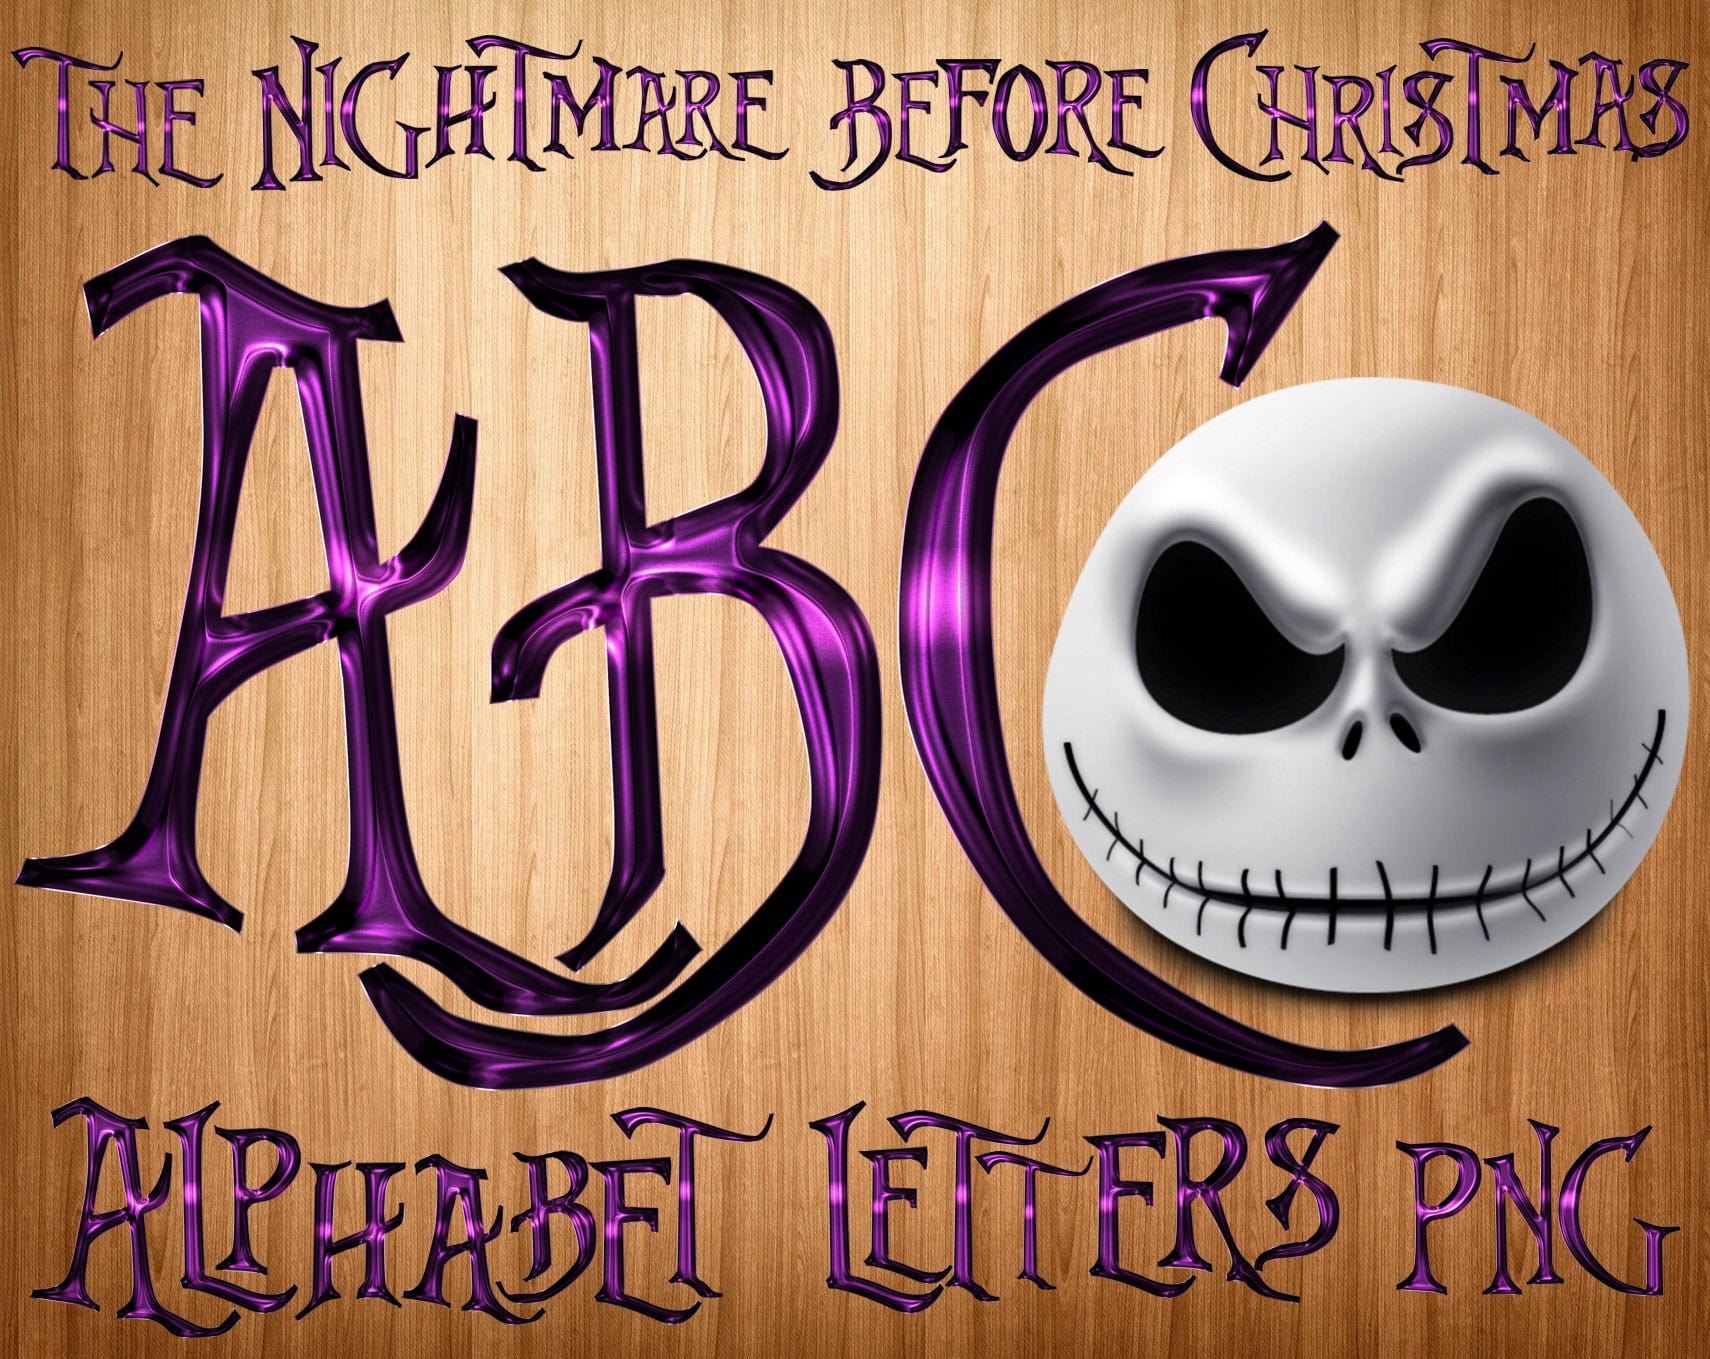 Nightmare before christmas font png, nightmare before christmas alphabet letters, digital nightmare before christmas cricut cut files png